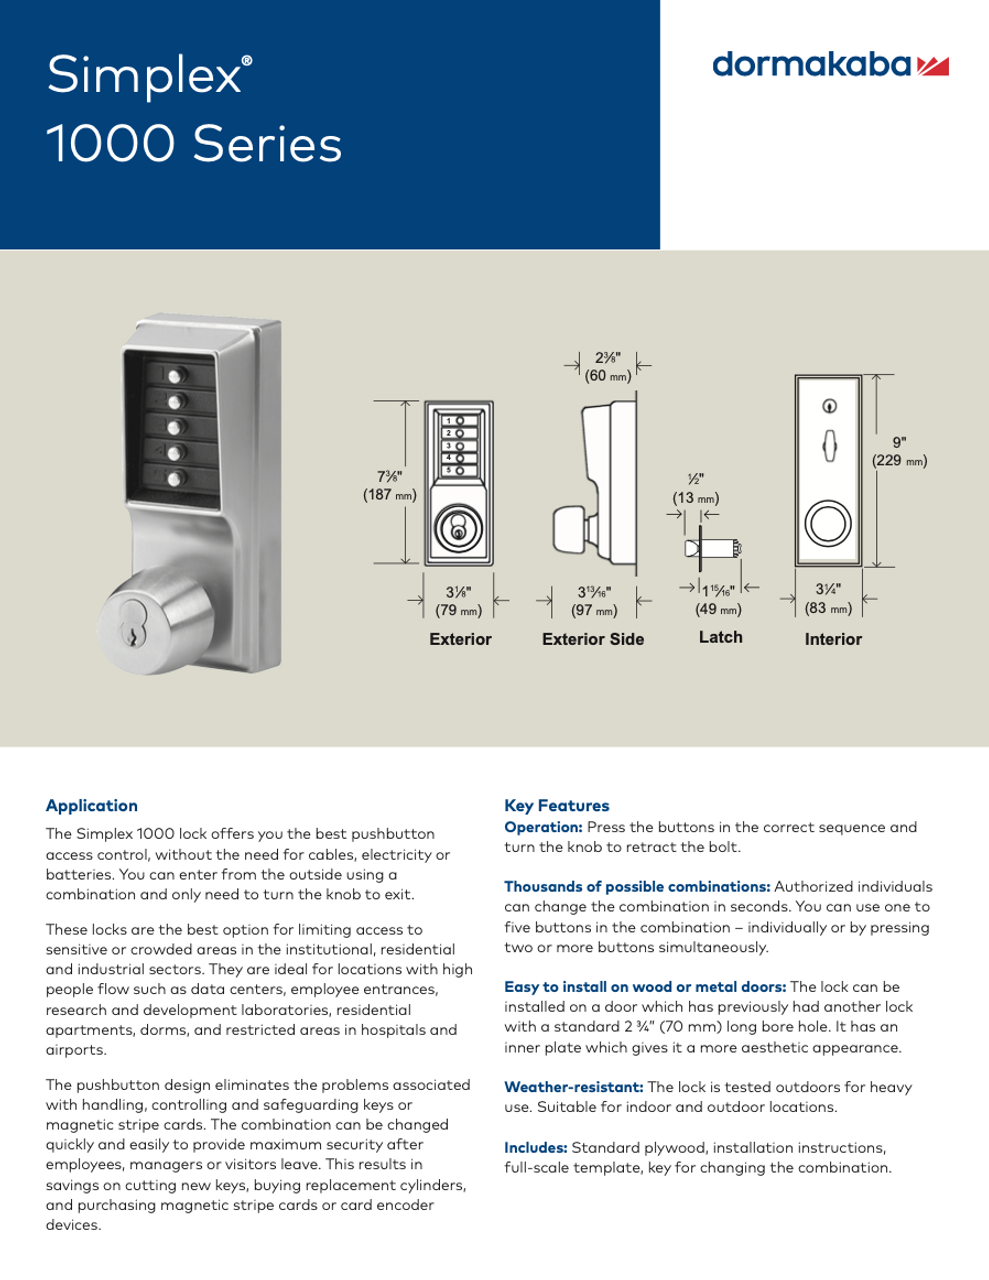 Dormakaba Simplex 1000 Series Mechanical Pushbutton Cylindrical Knob Lock  (with key override)